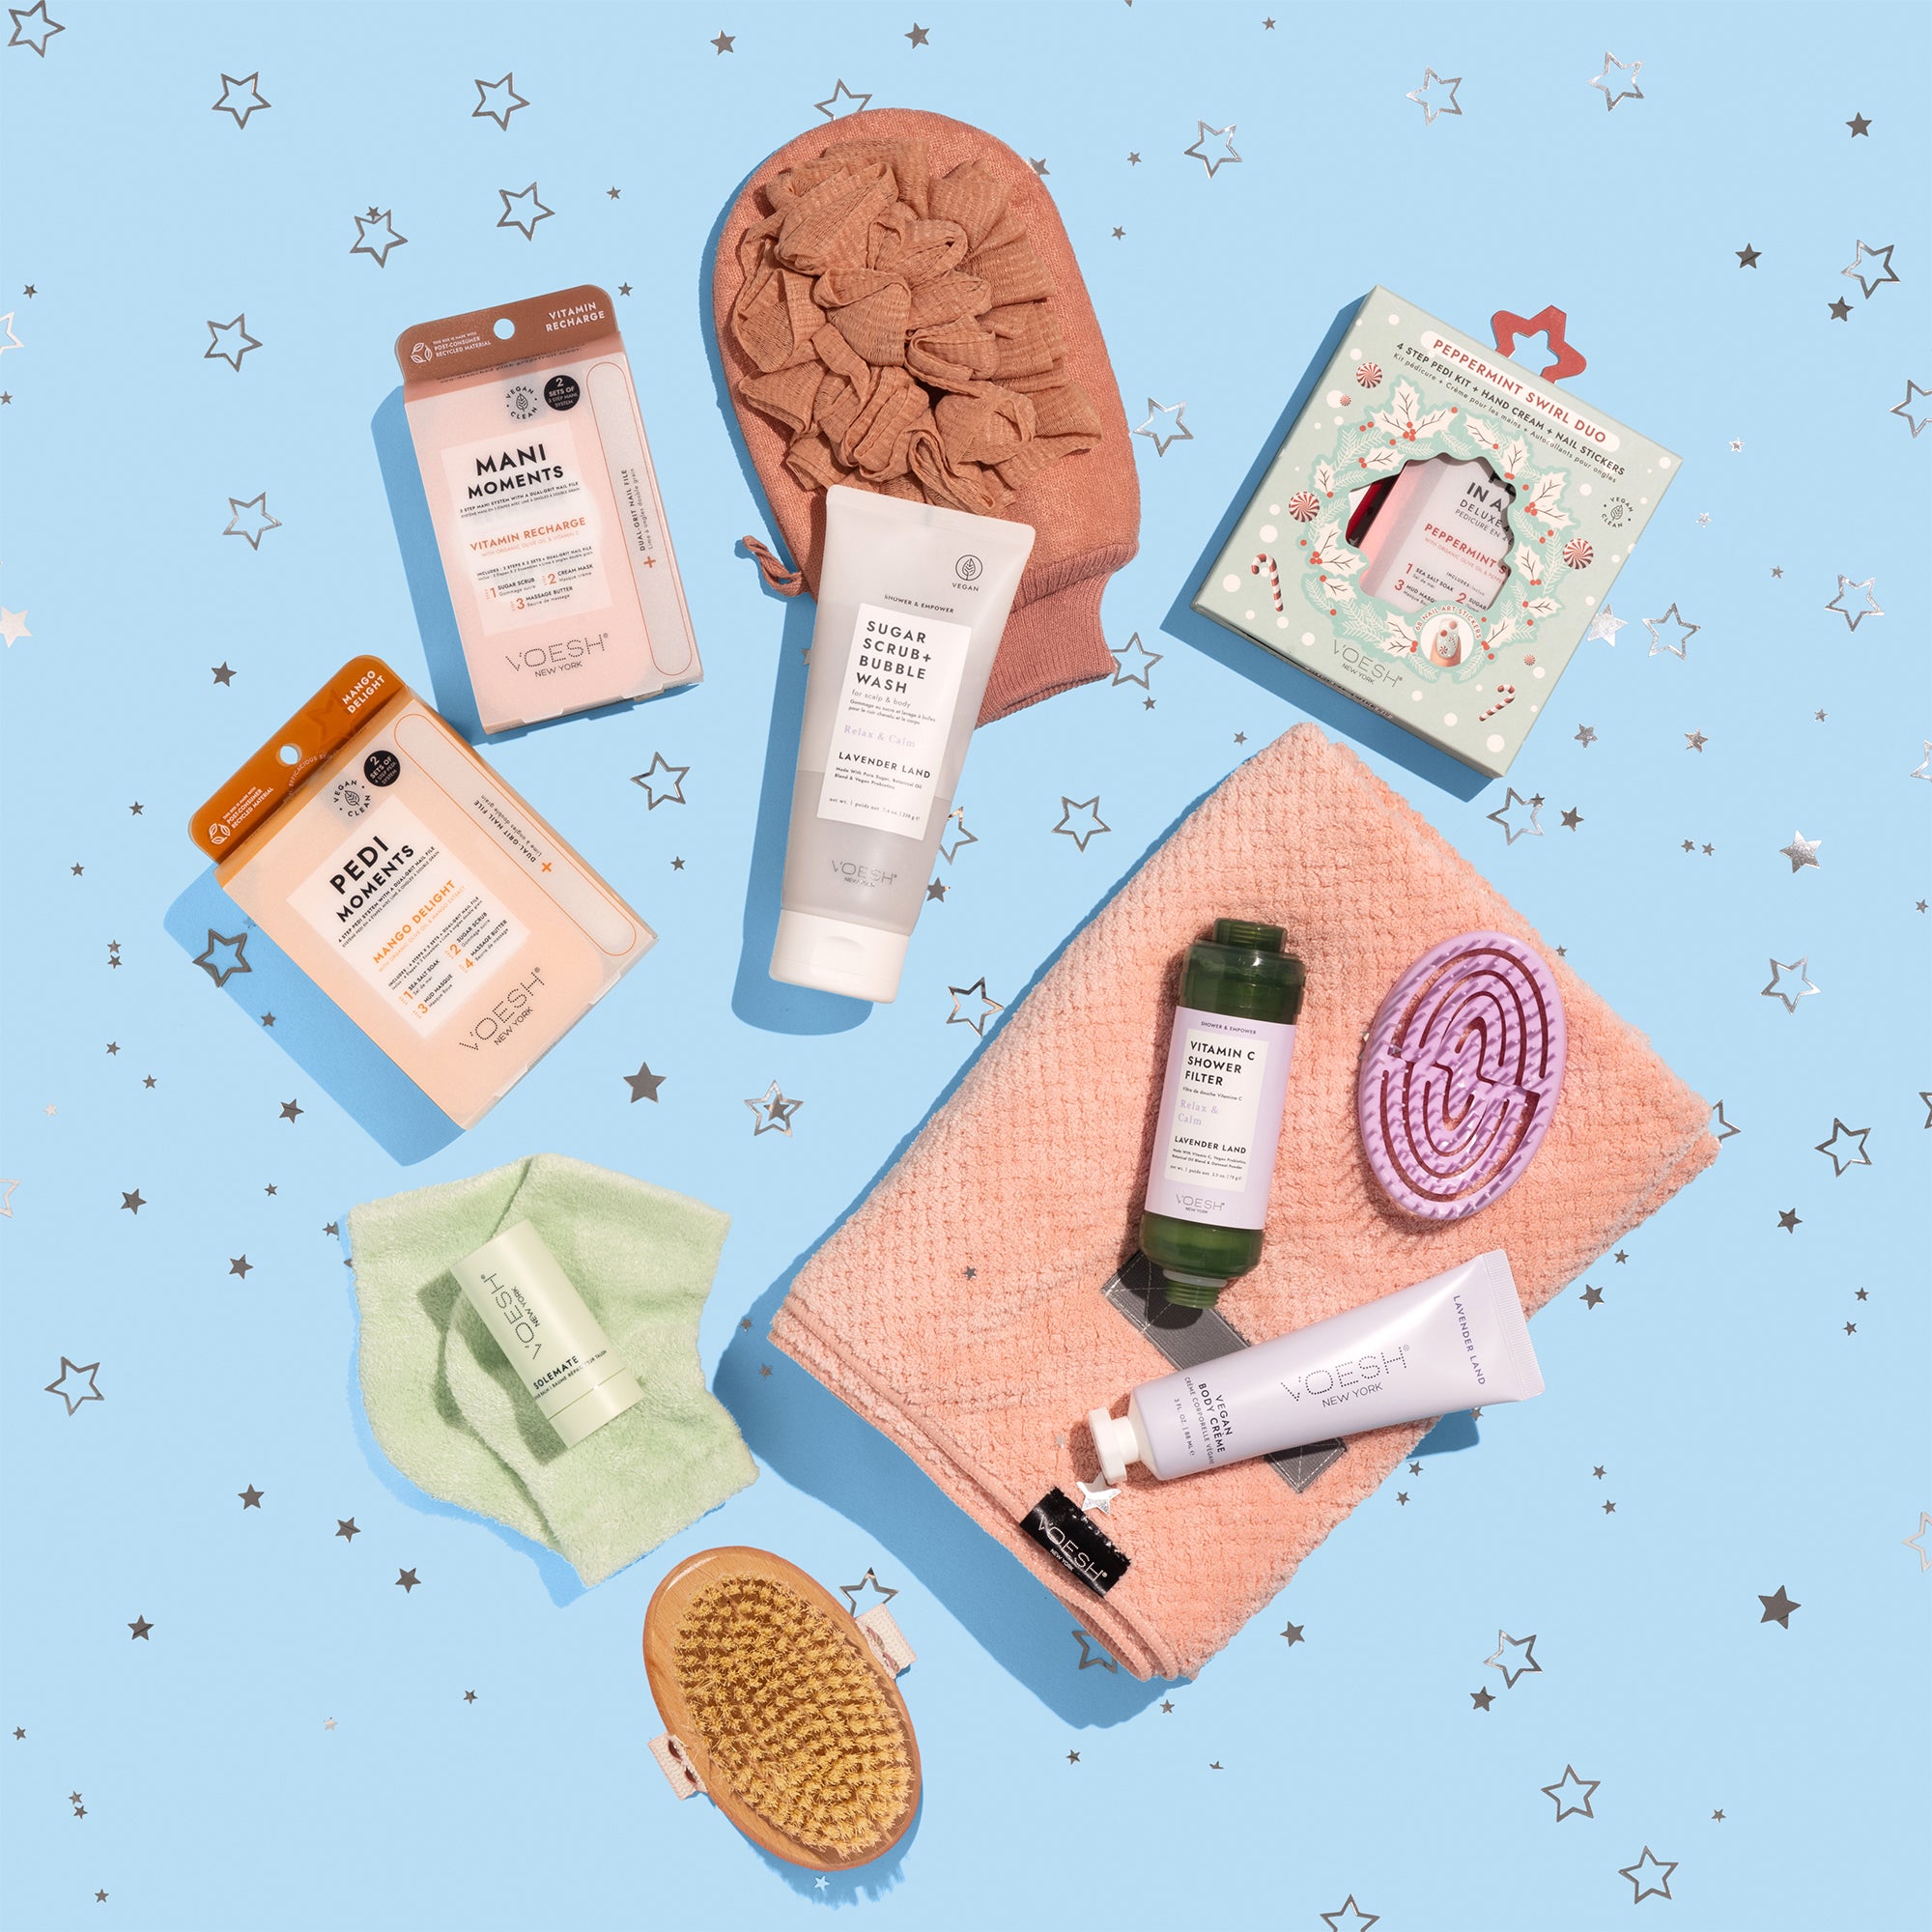 Voesh gift set featuring an assortment of product offerings